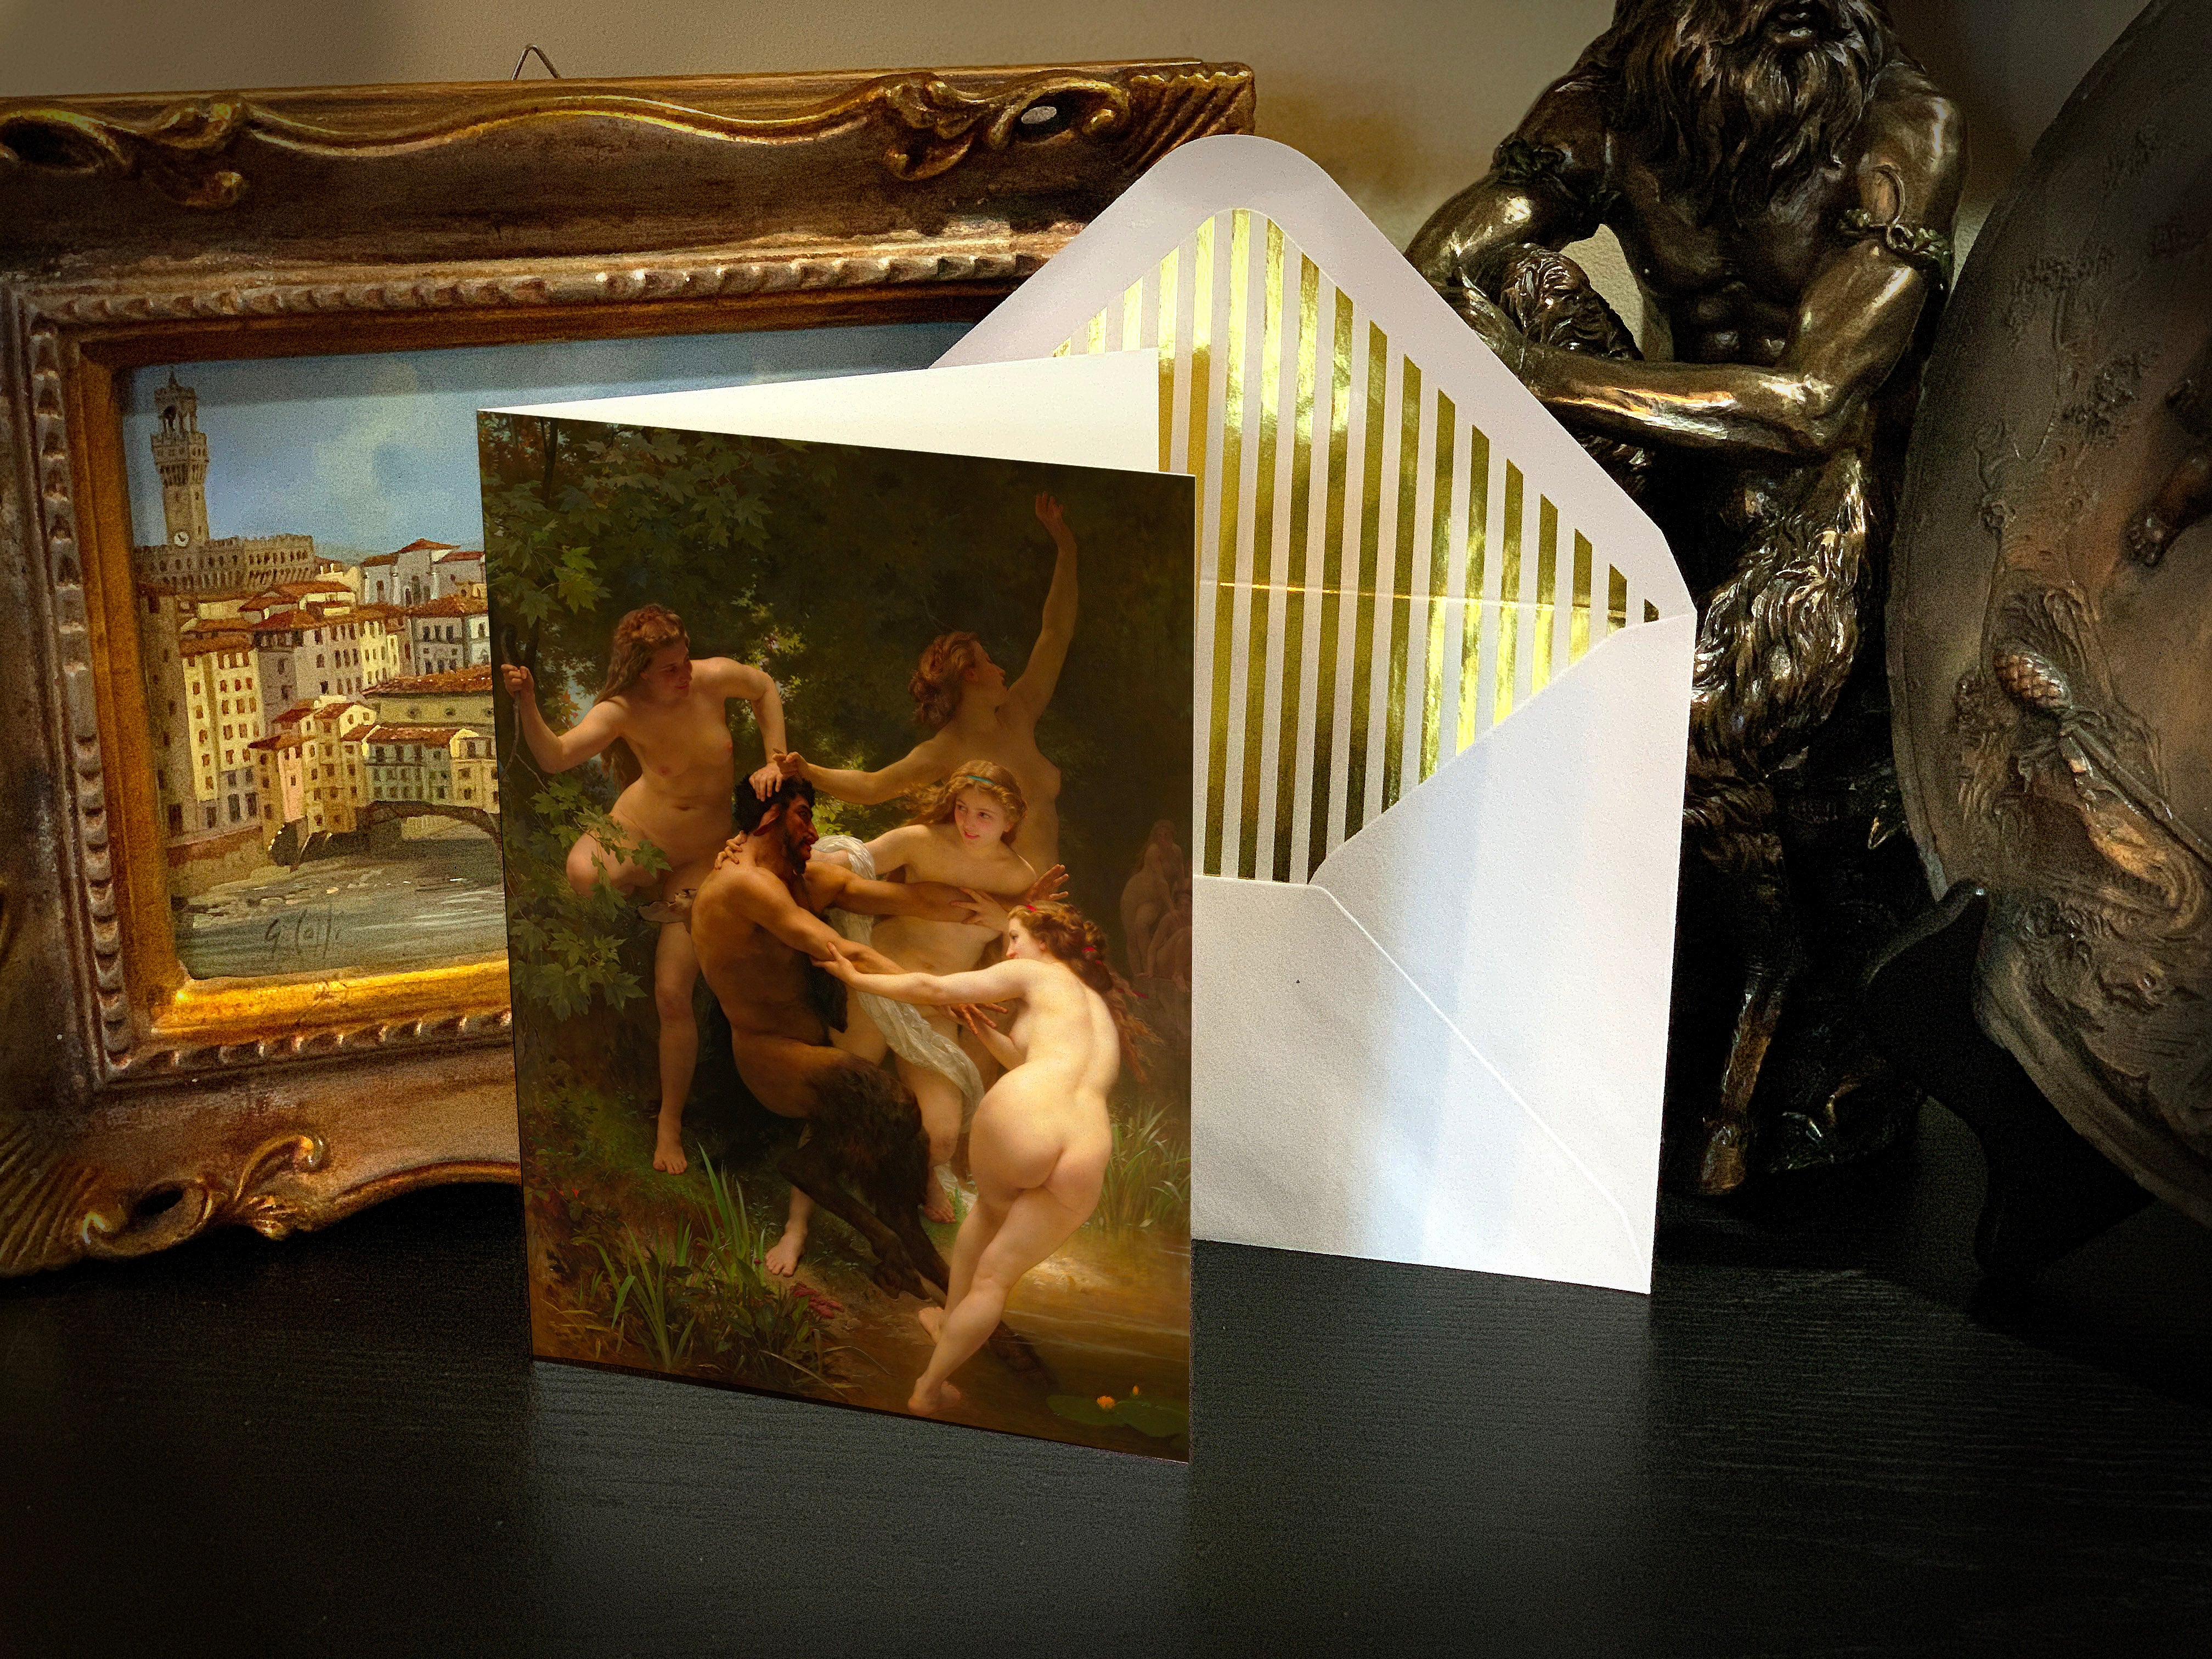 Nymph and Satyr, by Adolphe William Bouguereau, Greeting Card, with Elegant Gold Foil Envelope